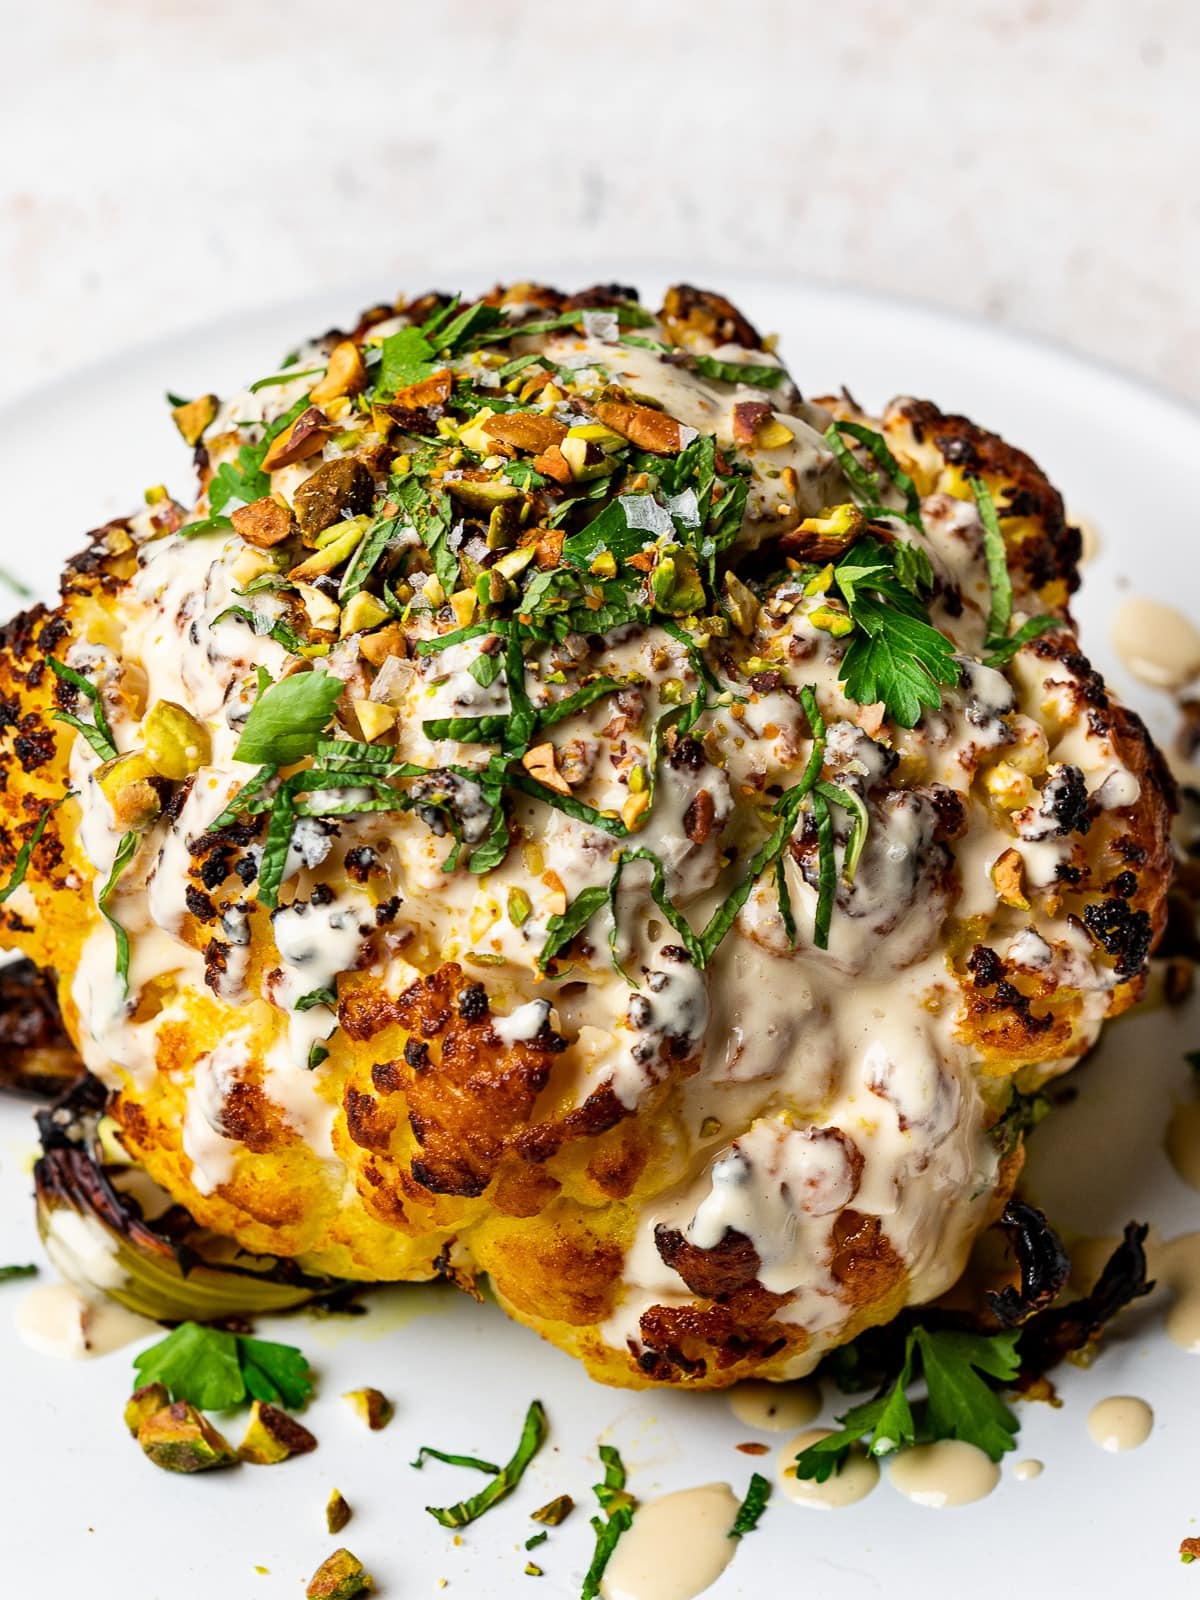 Roasted cauliflower drizzled with white sauce, chopped parsley leaves and seeds.